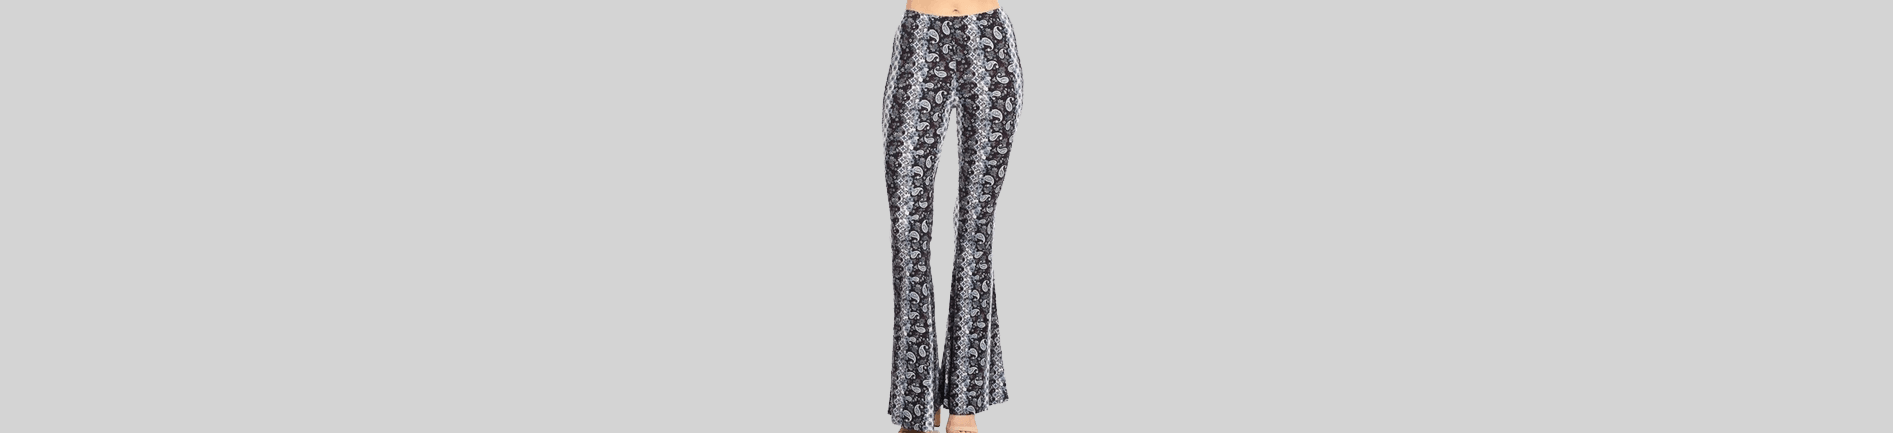 SHOP BY COLLECTION: PALAZZO PANTS - hotRAGS.com